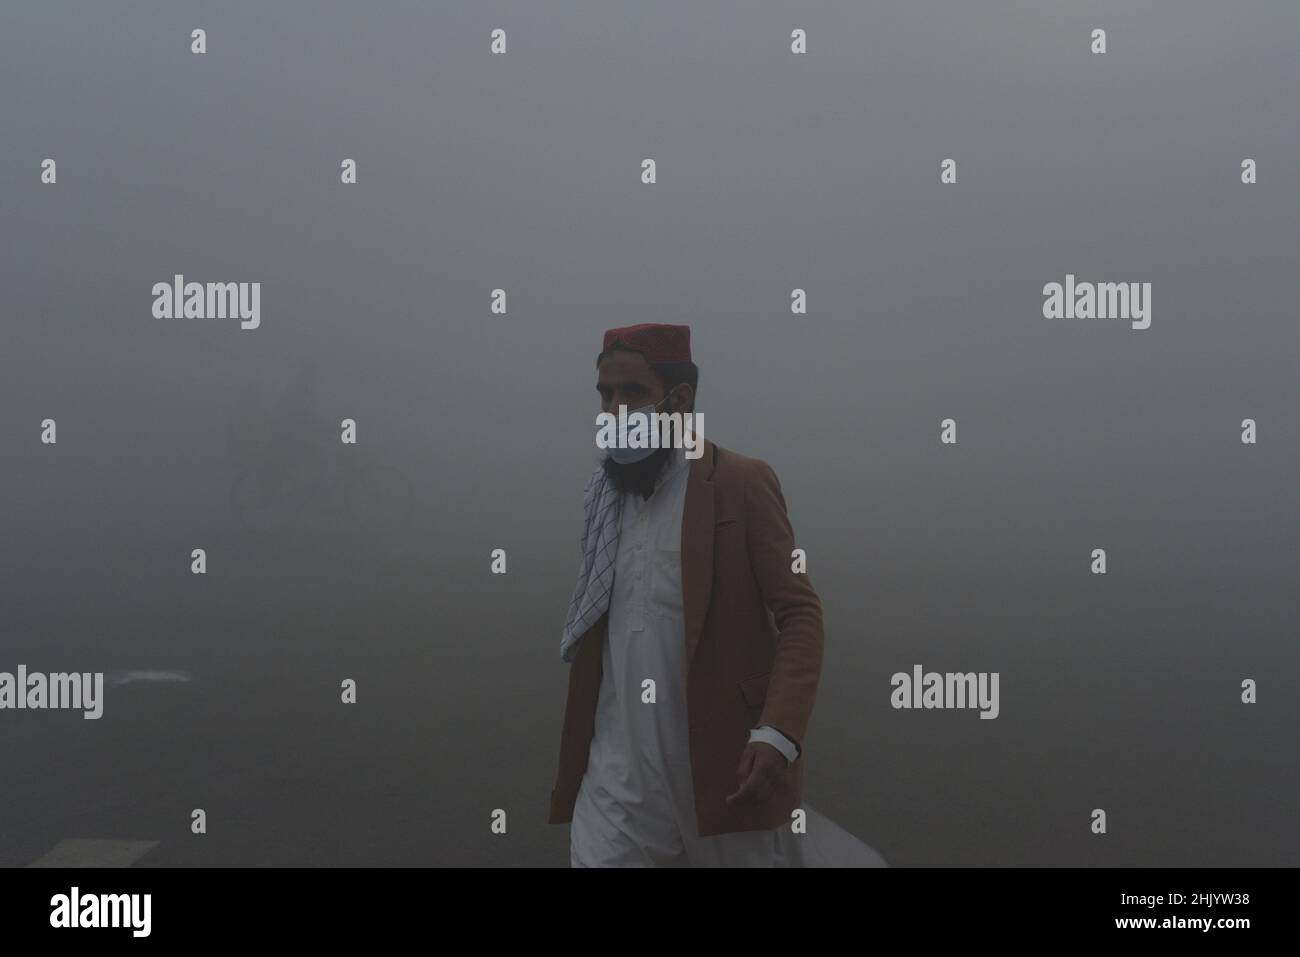 Lahore, Punjab, Pakistan. 1st Feb, 2022. Pakistani citizens and students on their way during a cold and dense foggy morning in Lahore. Pakistani residents and commuters are more worried than surprised due to the sudden layer of dense fog and smog which is causing problems in respiration, visibility and has also hampered smooth flow of traffic, residents of Lahore woke up to a dense blanket of fog and smog on Tuesday that reduced visibility for commuters and prompted several complaints of respiratory problems and mental anguish. (Credit Image: © Rana Sajid Hussain/Pacific Press via ZUMA Pres Stock Photo